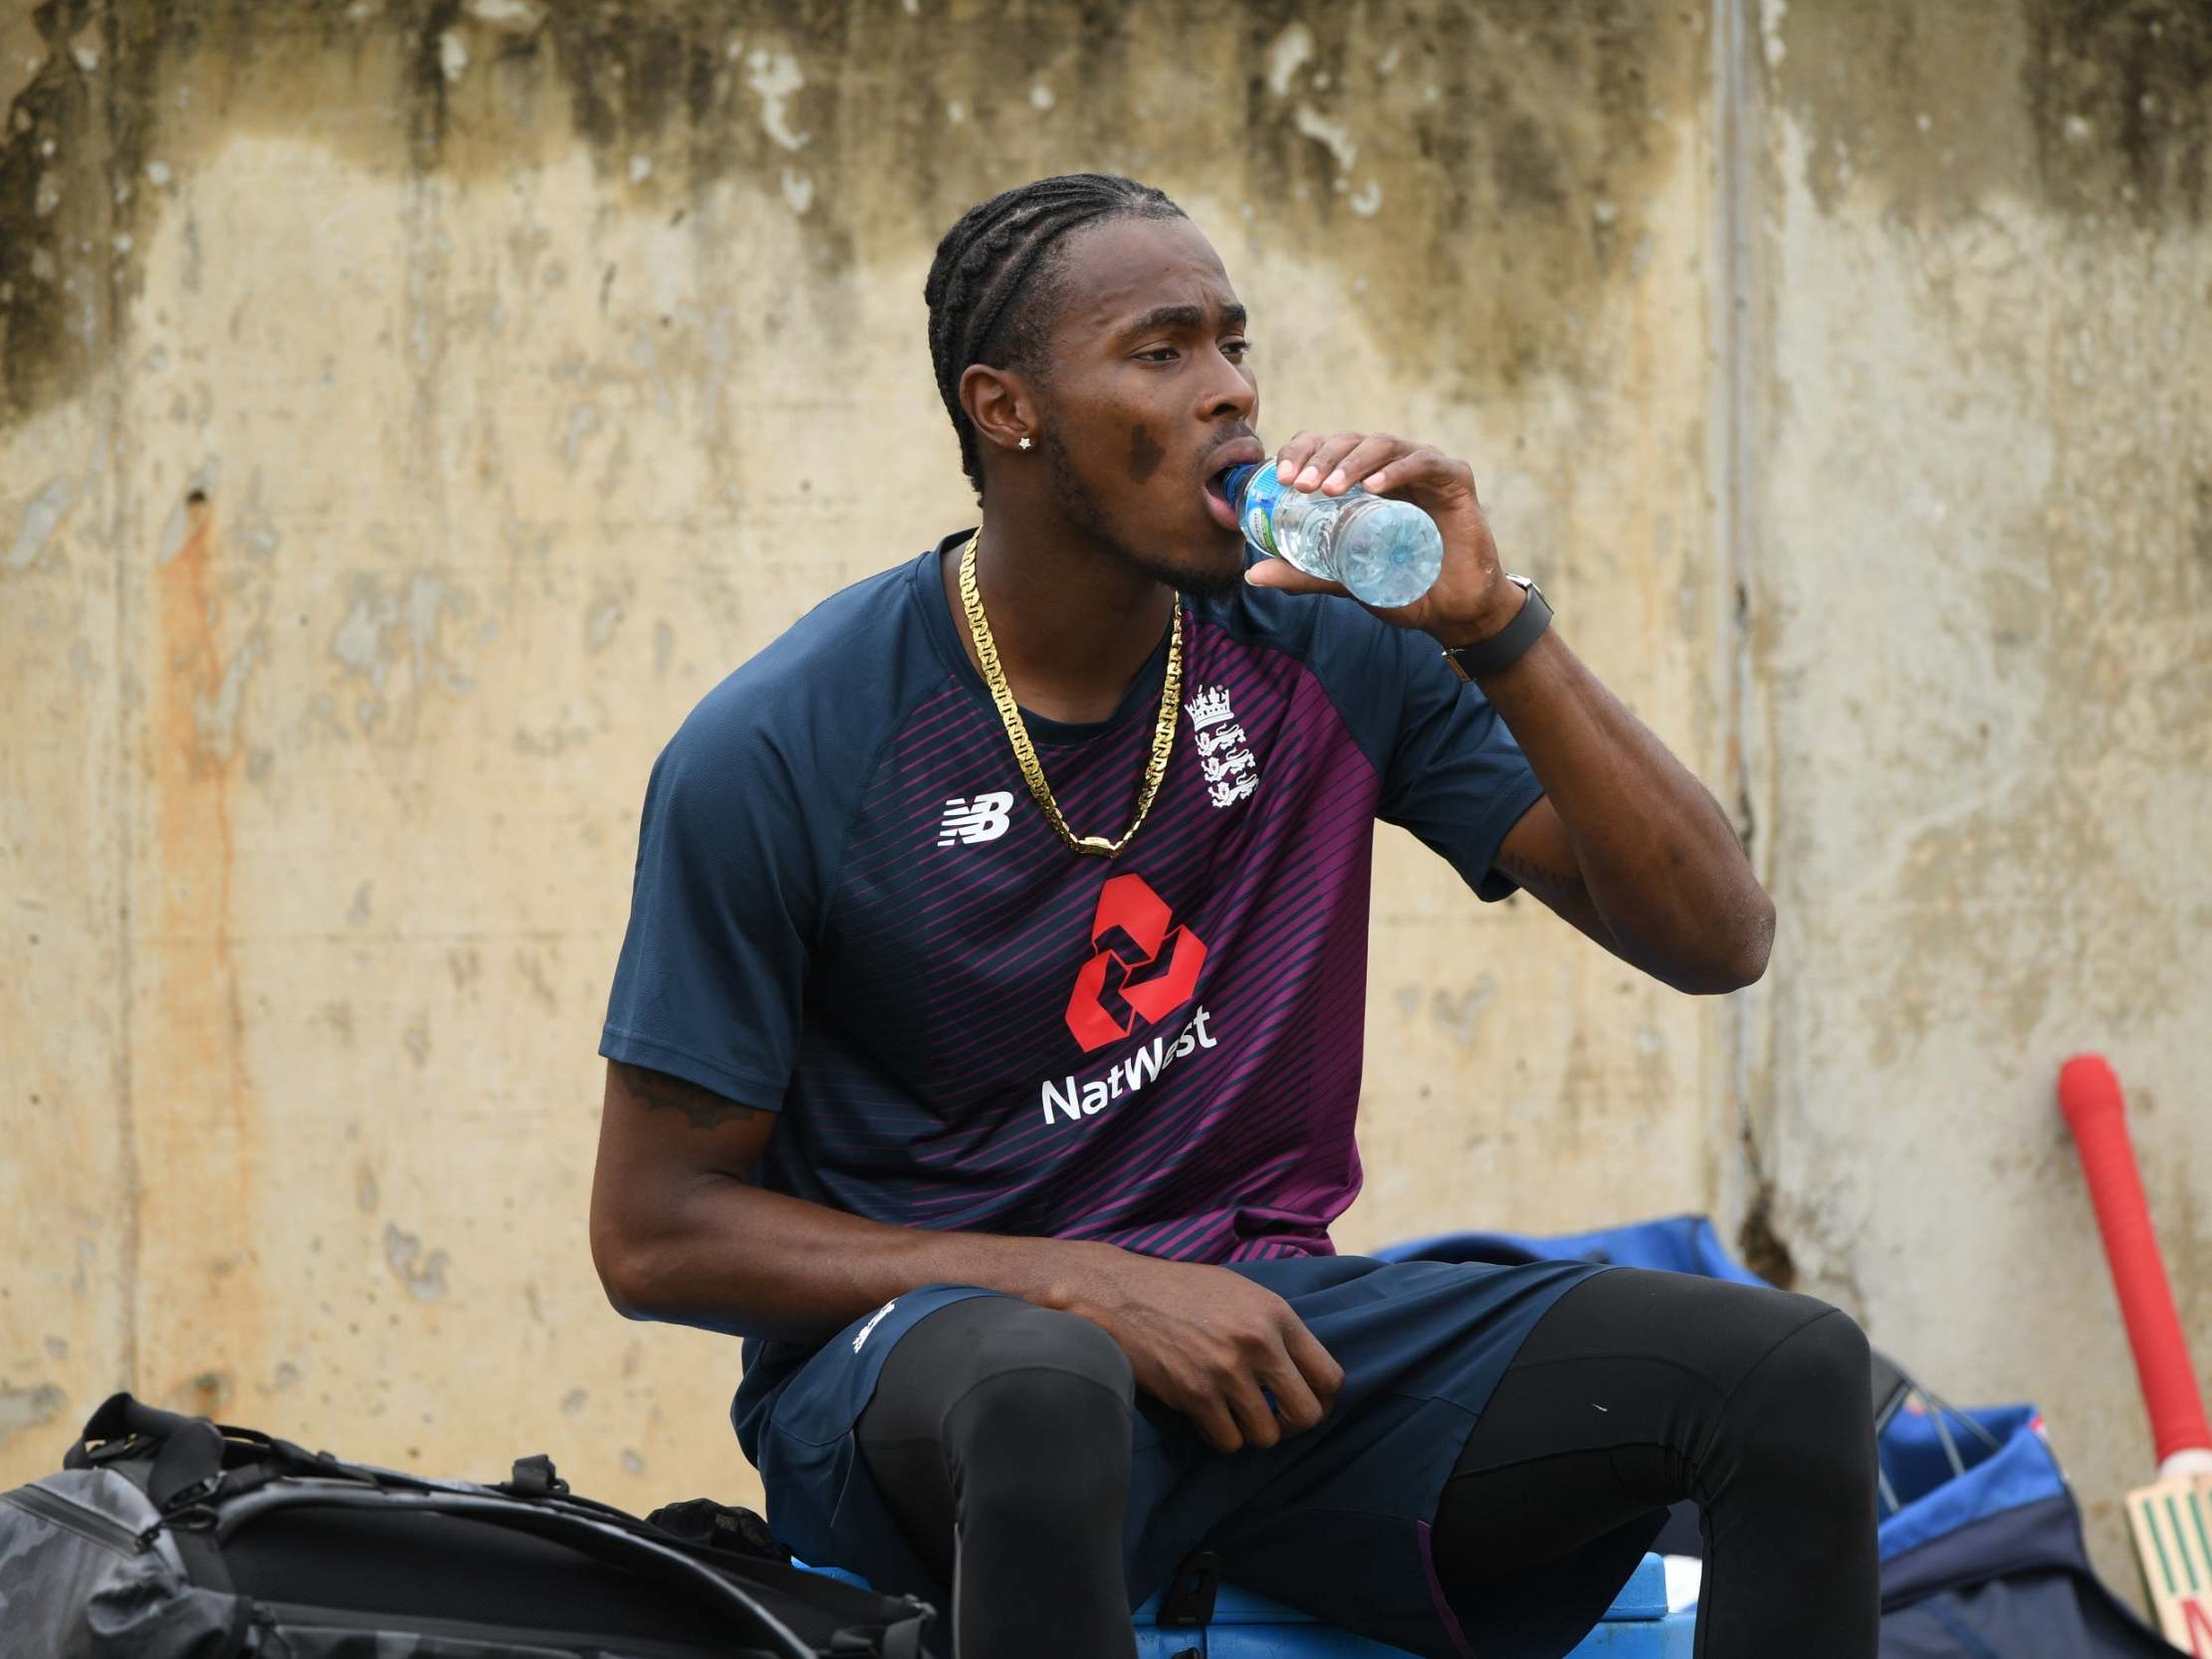 Jofra Archer was unable to bowl during a training session ahead of the second Test